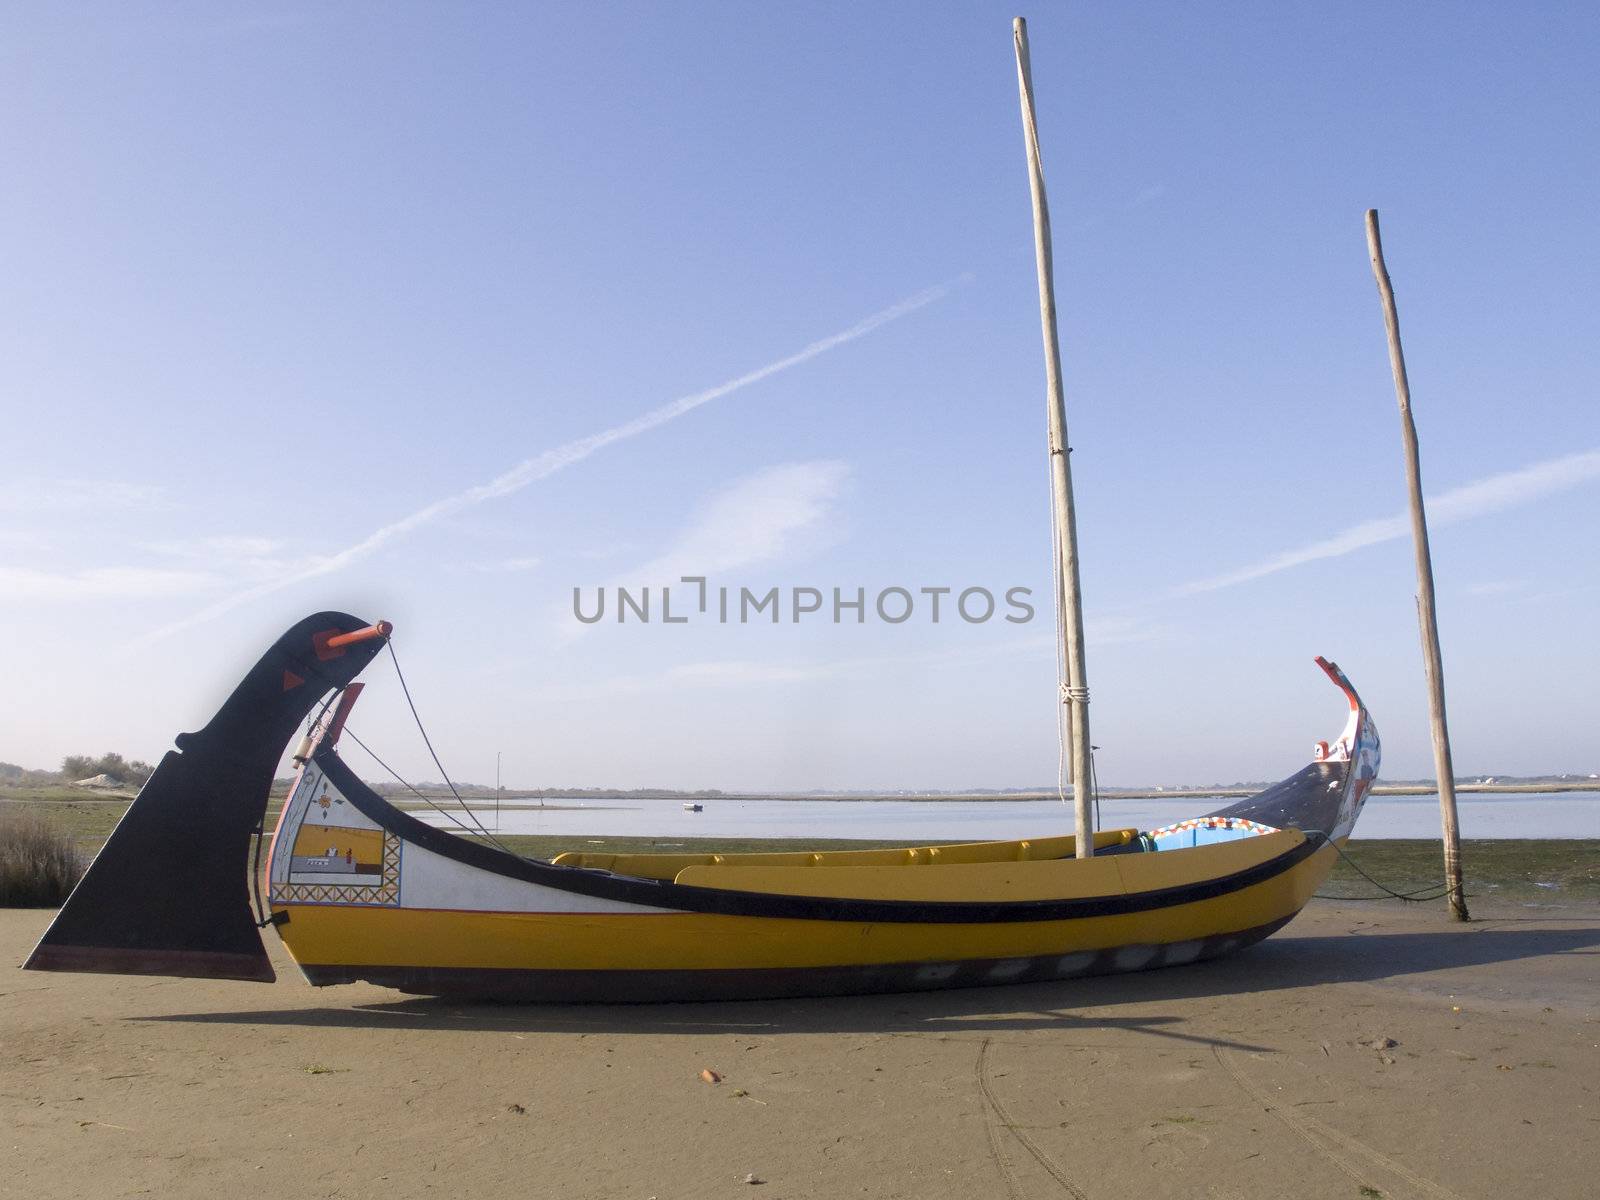 Moliceiro boat by PauloResende